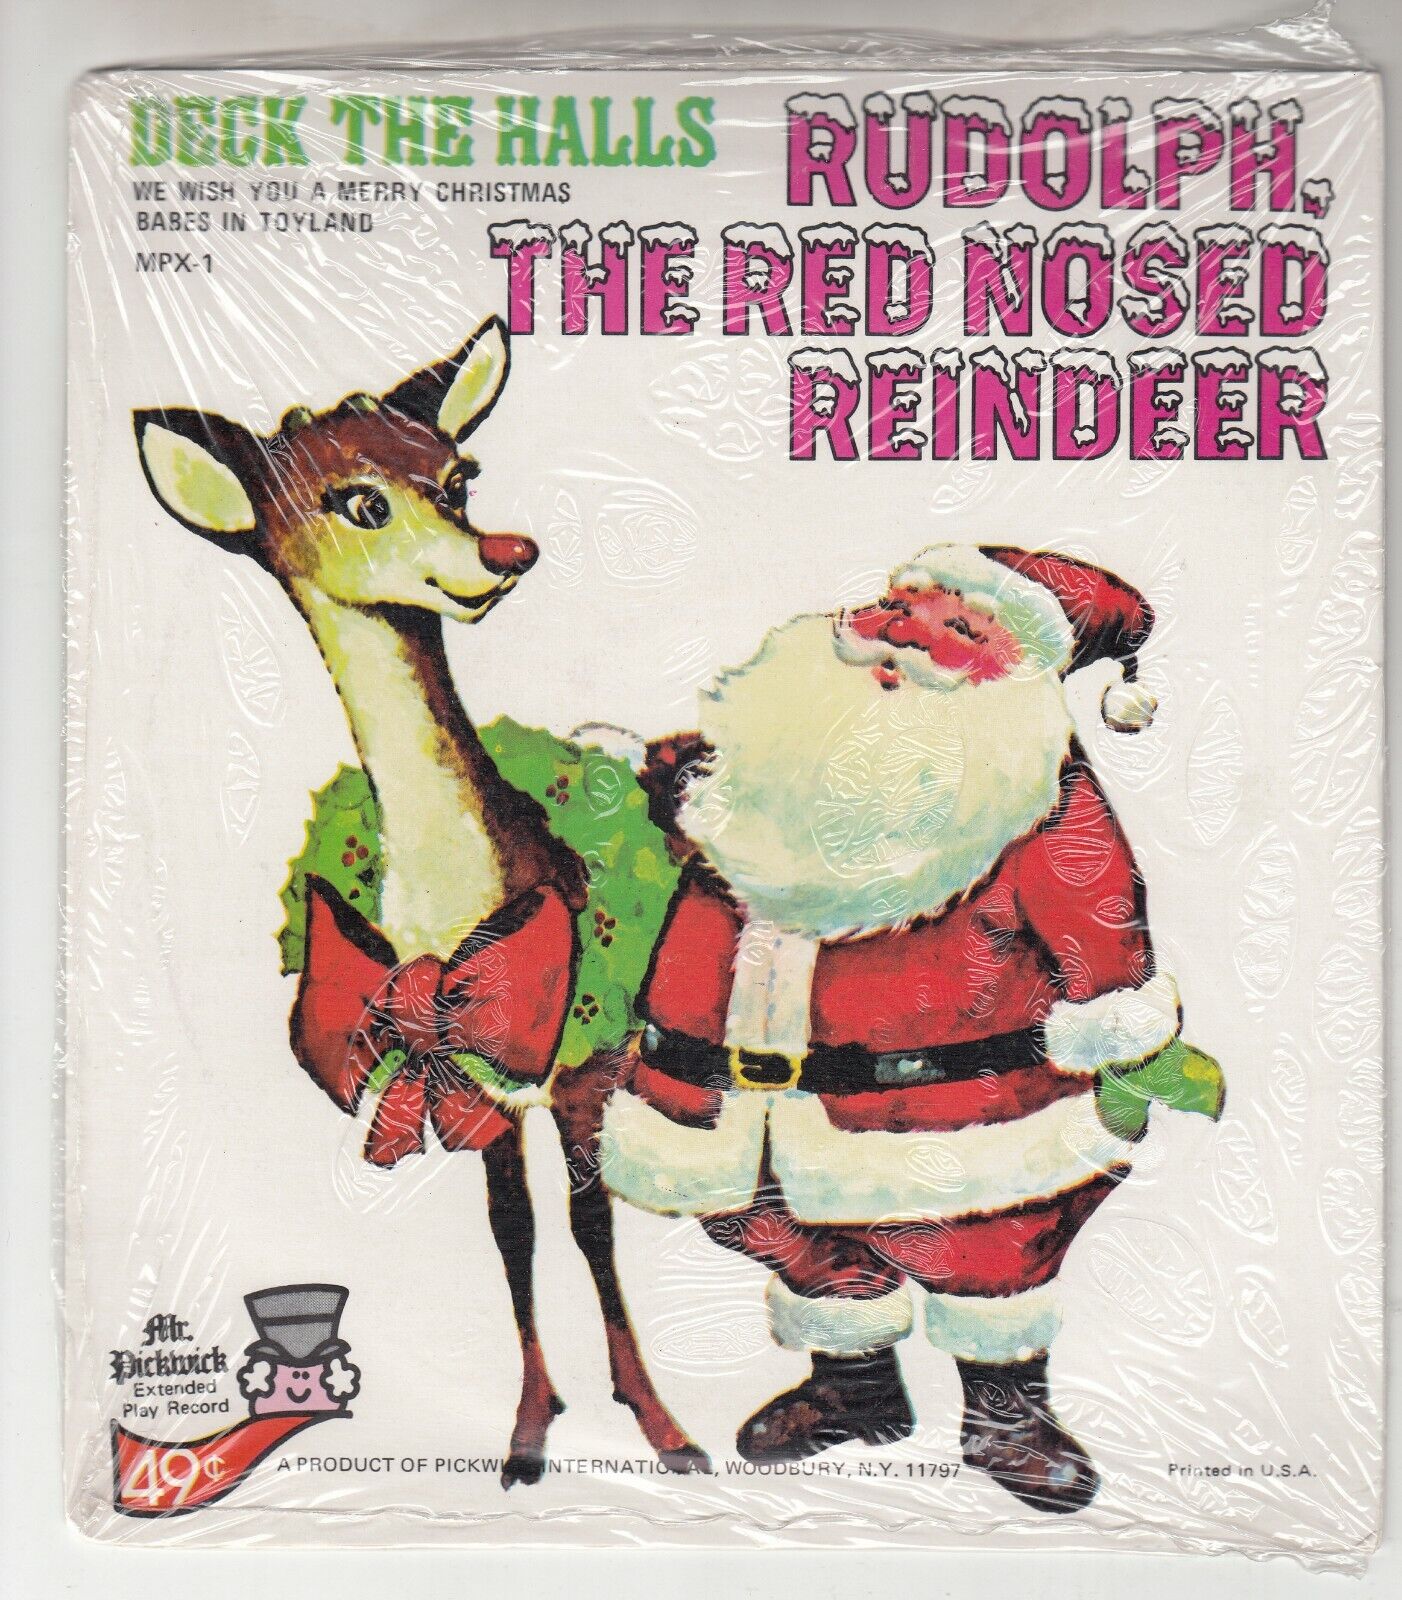 RUDOLPH, THE RED NOSED REINDEER Mr. Pickwick Record NEW and SEALED Vintage 45RPM